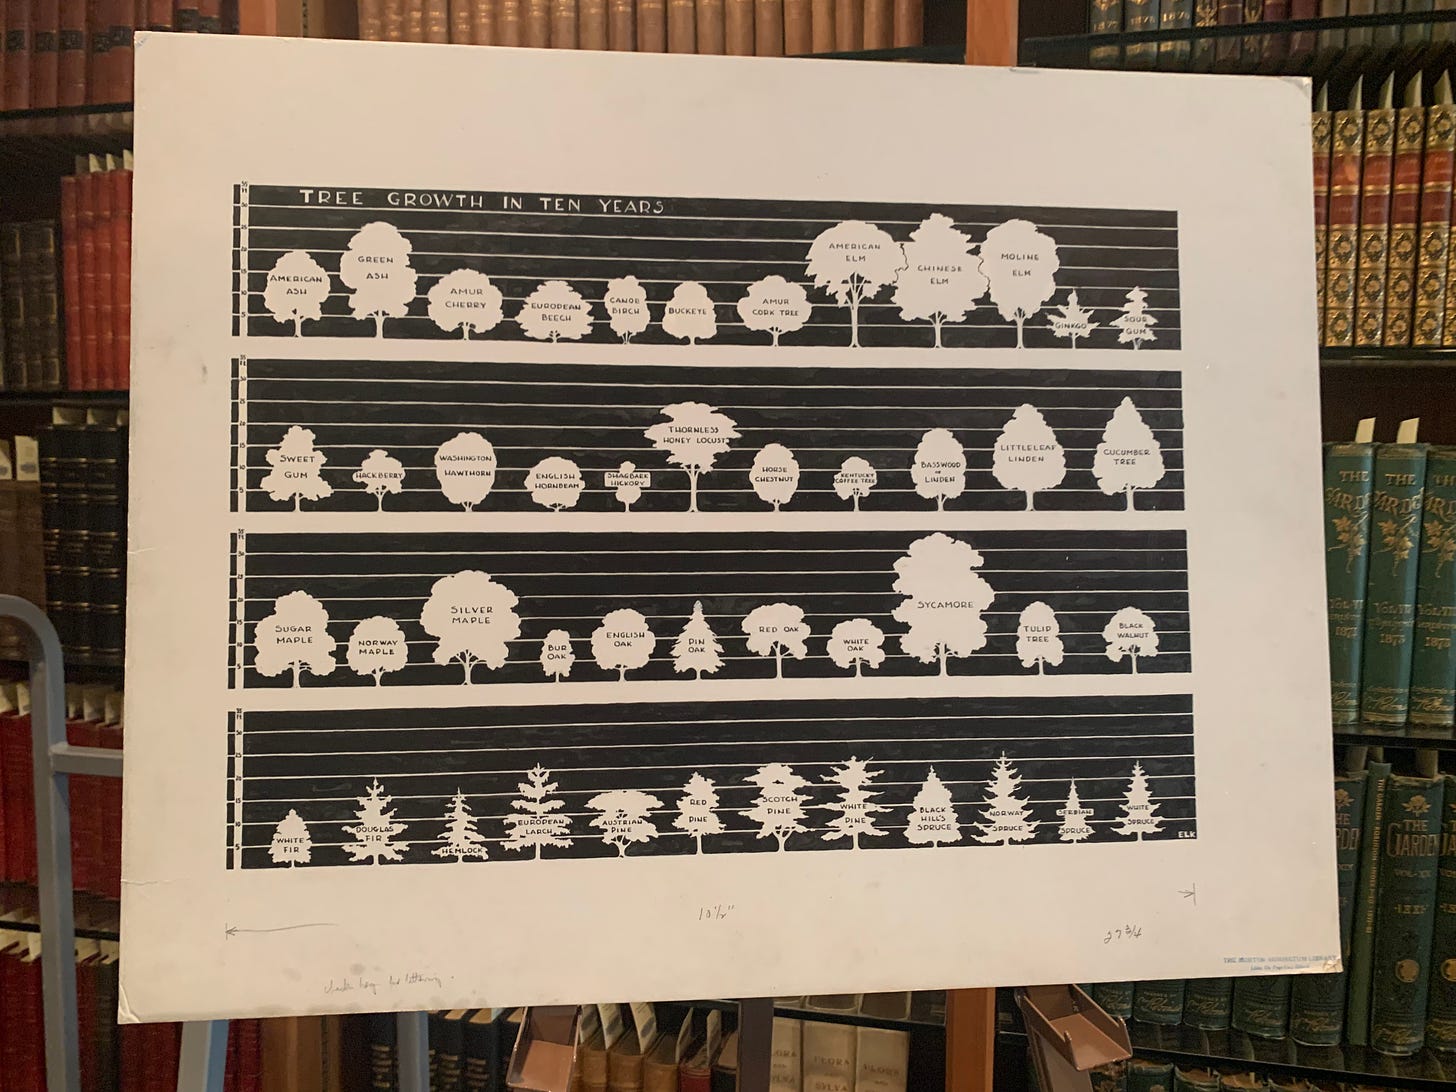 Large white poster board with black ink outlines of various trees showing their growth after ten years.